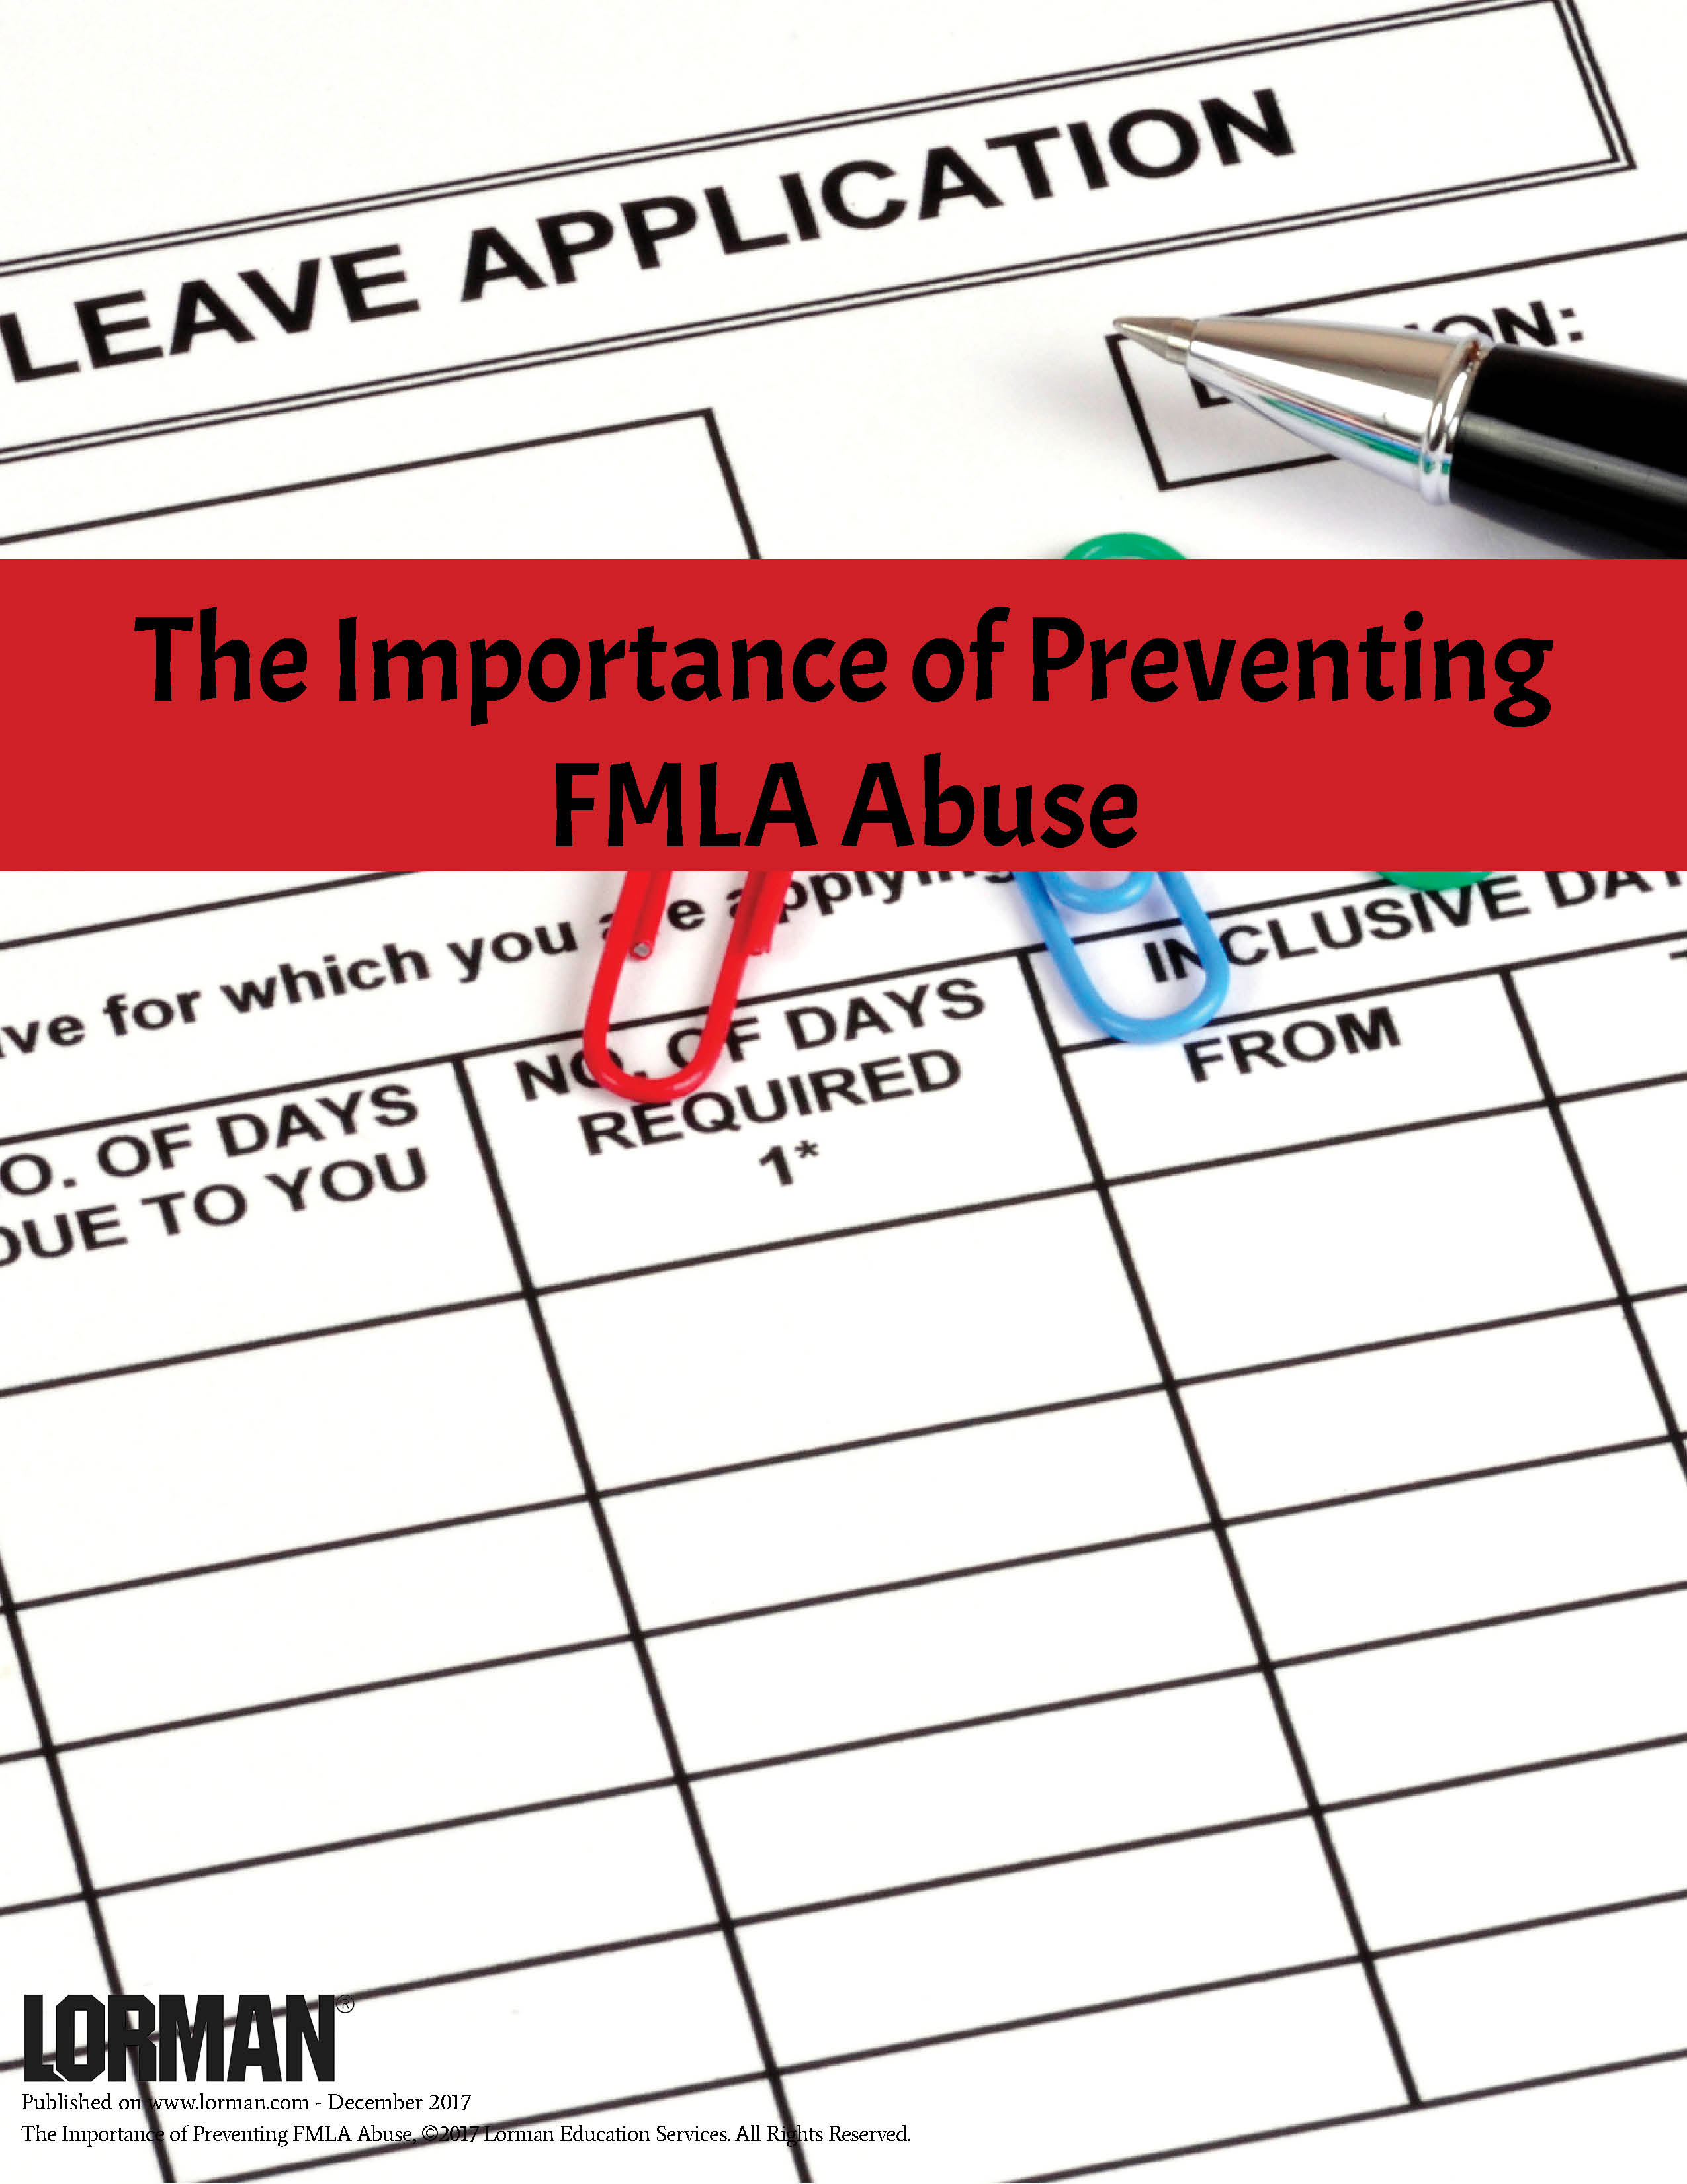 The Importance of Preventing FMLA Abuse